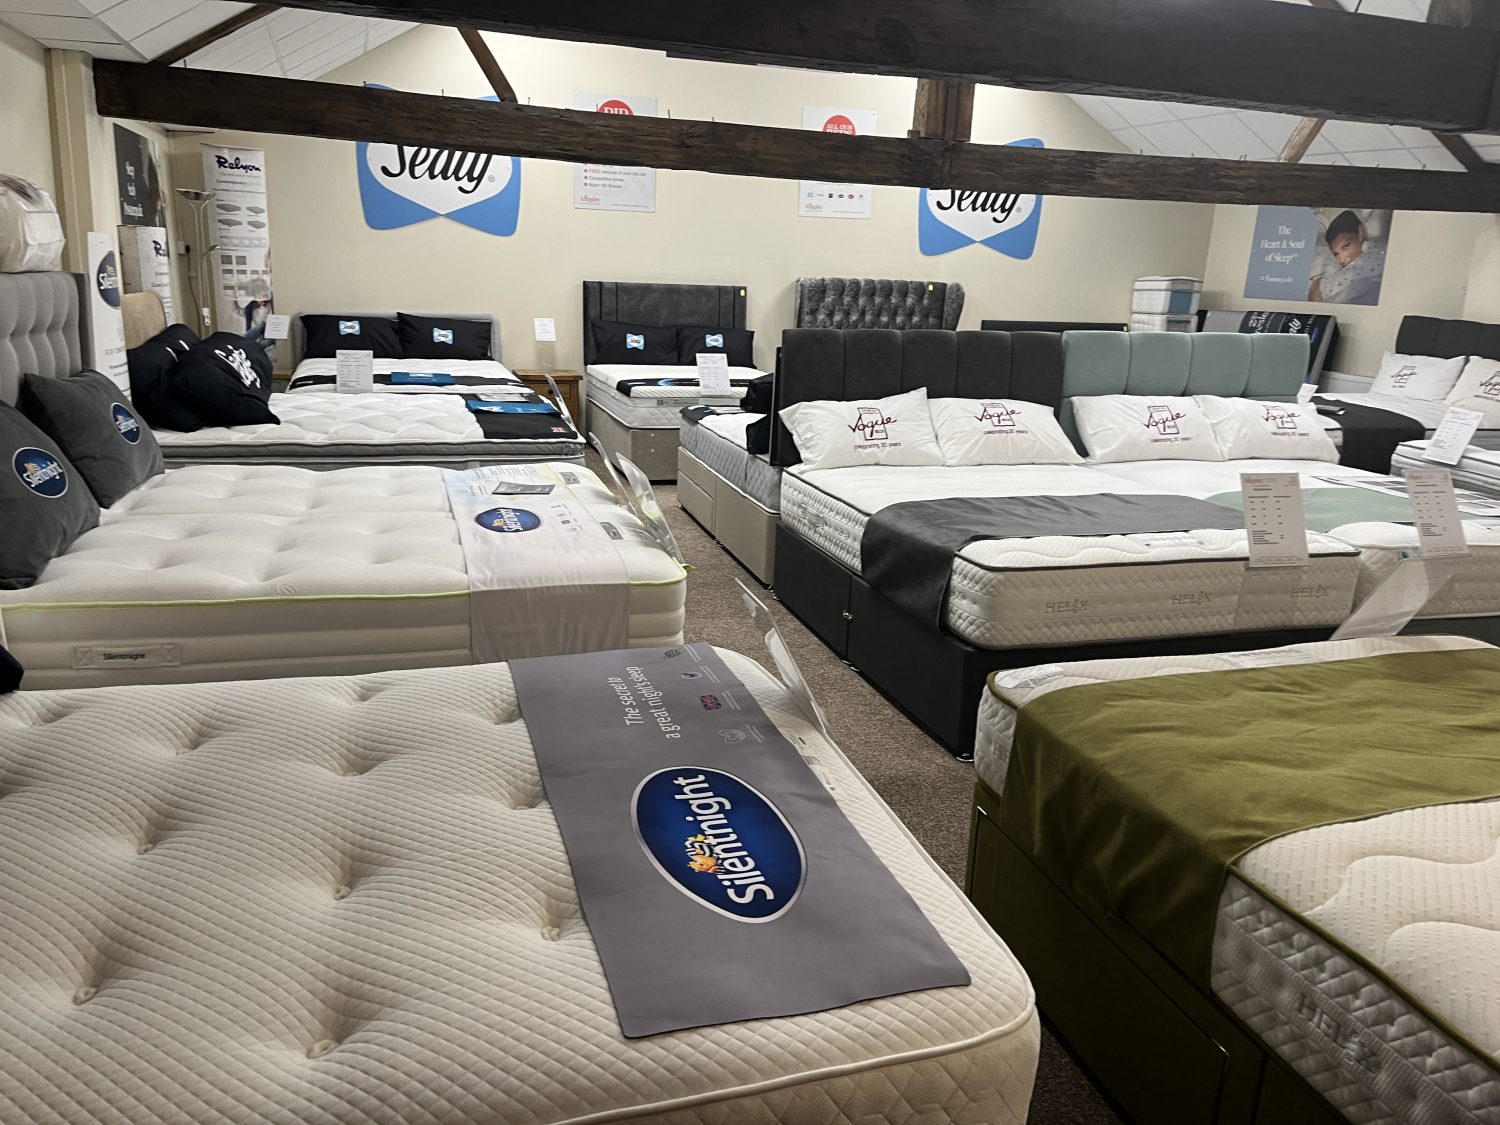 SEALY Beds @ our Frodsham store